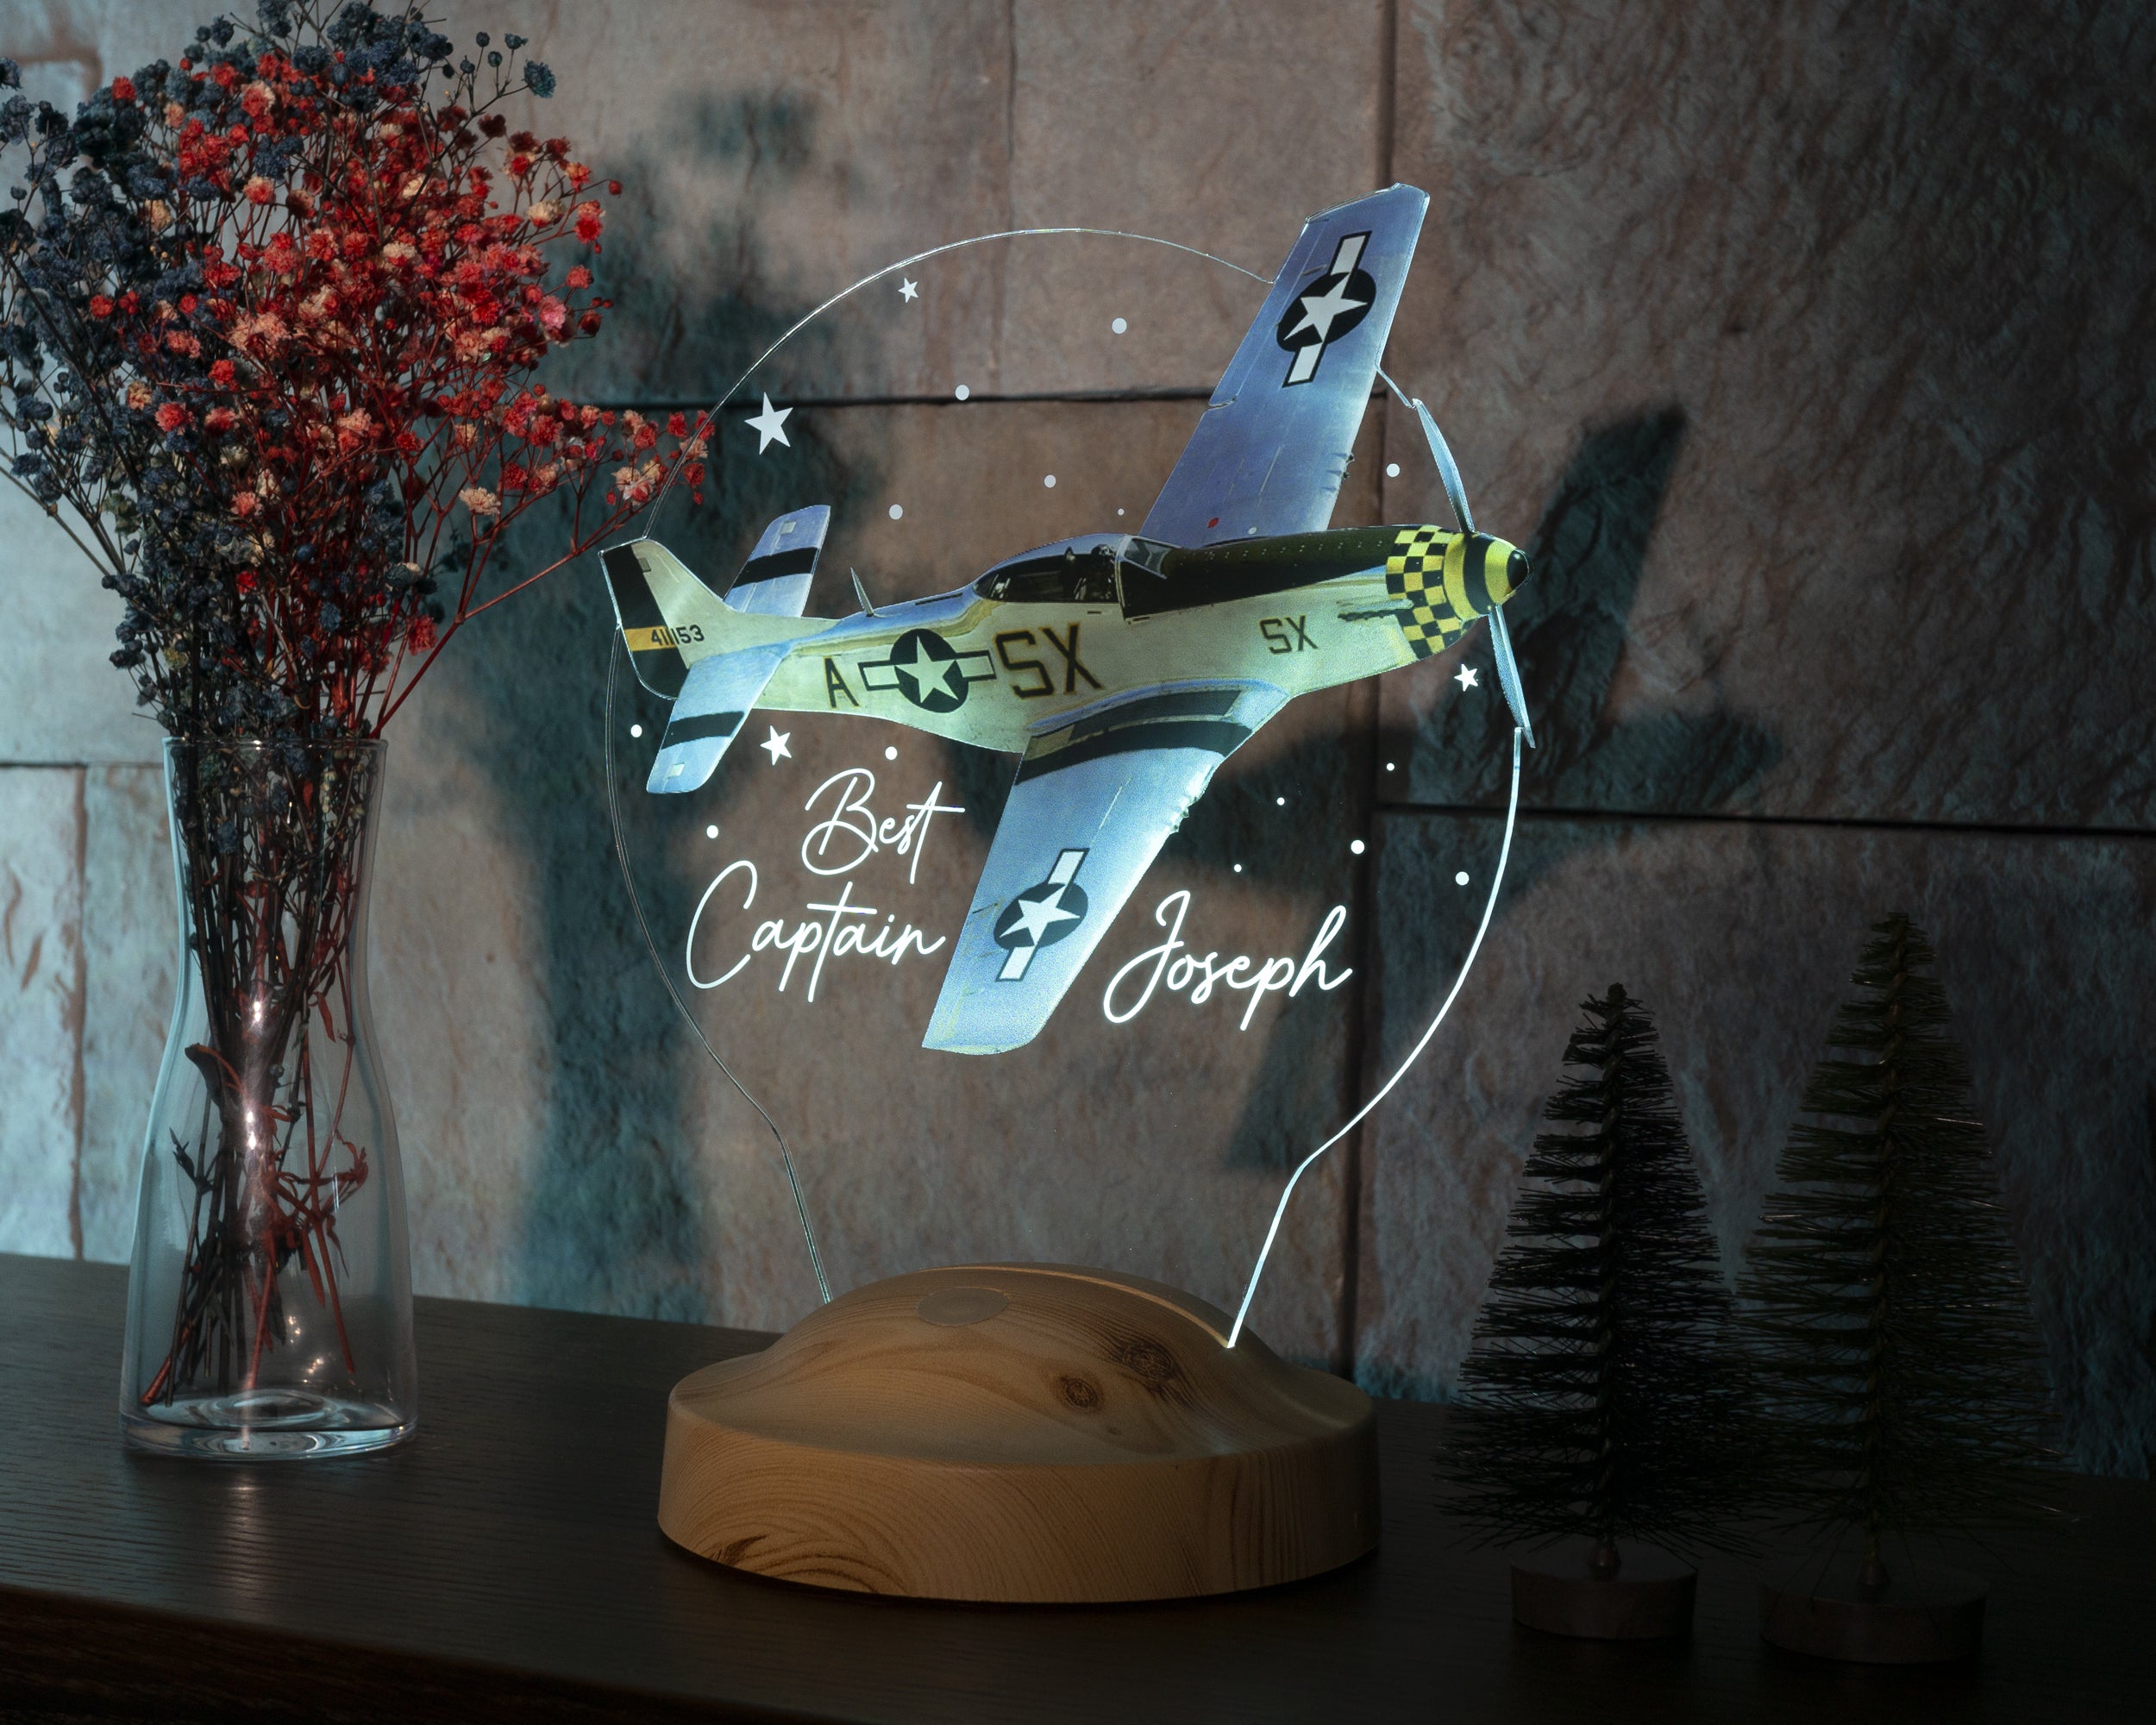 AIRPLANE NIGHT LIGHT Rgb night light, Mustang P52 airplane light perfect for bedside table